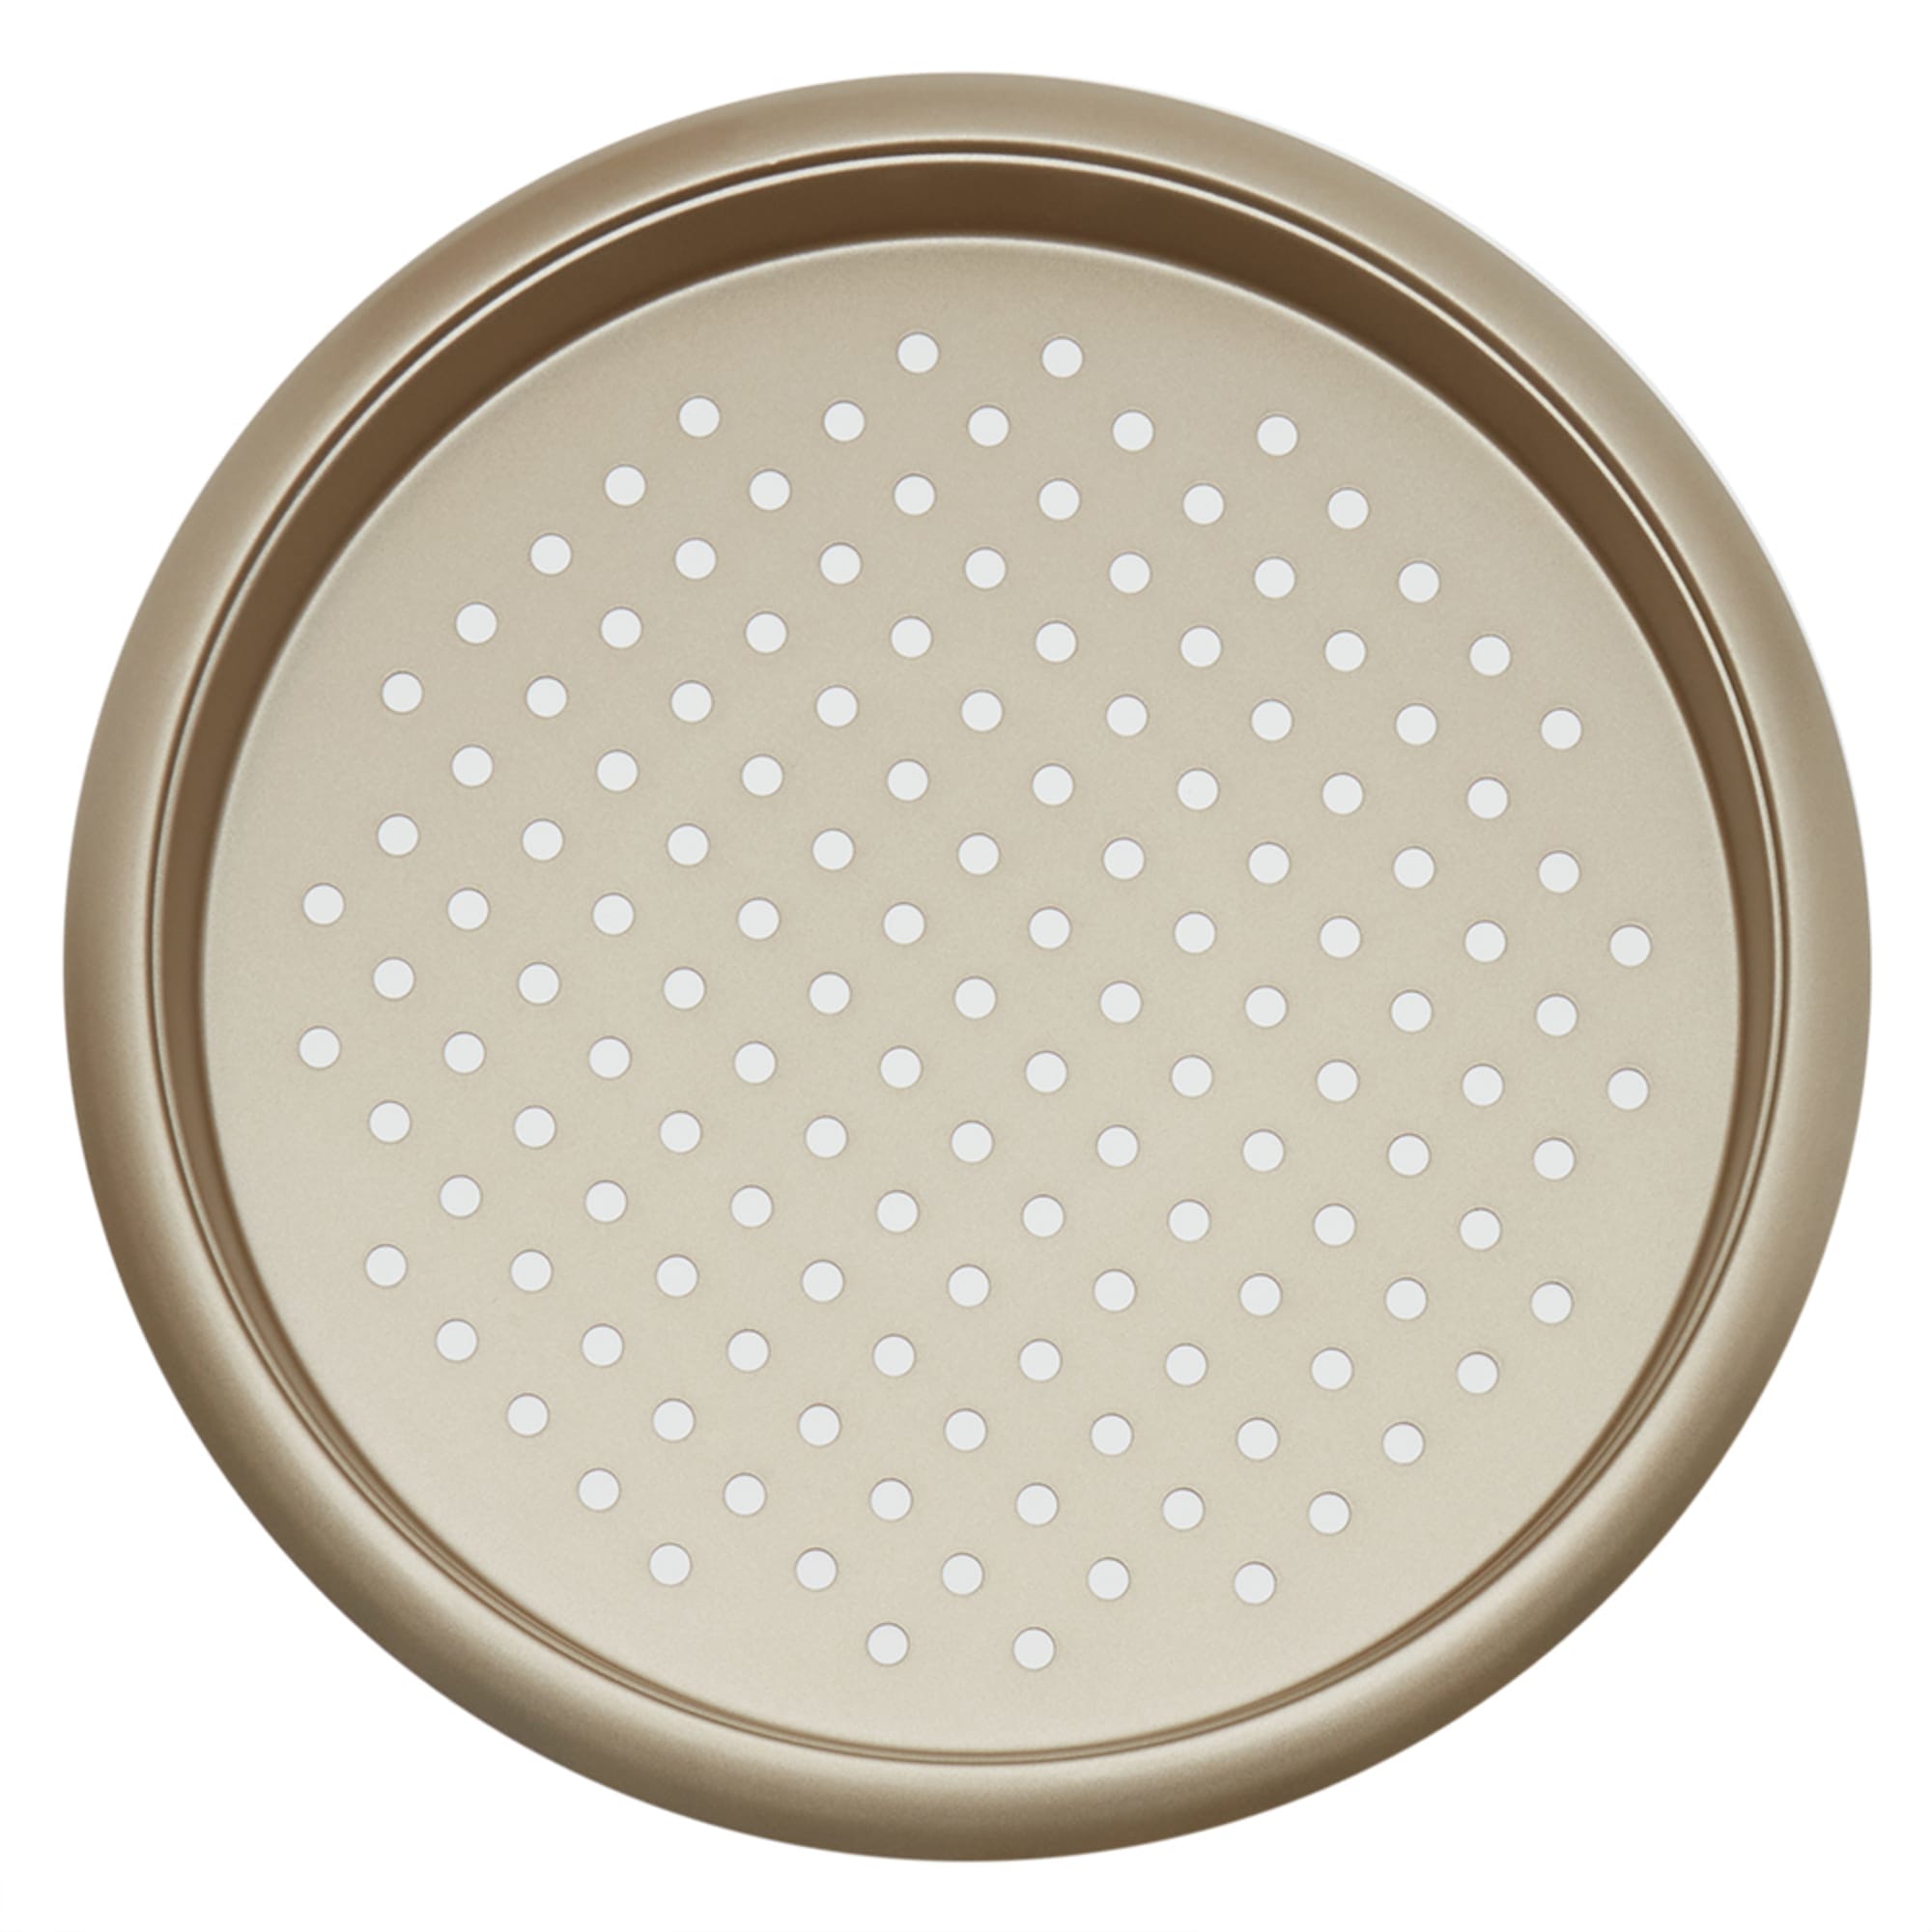 Home Basics Aurelia Non-Stick 13.75” x 1” Carbon Steel Perforated Pizza Pan, Gold $6.00 EACH, CASE PACK OF 12